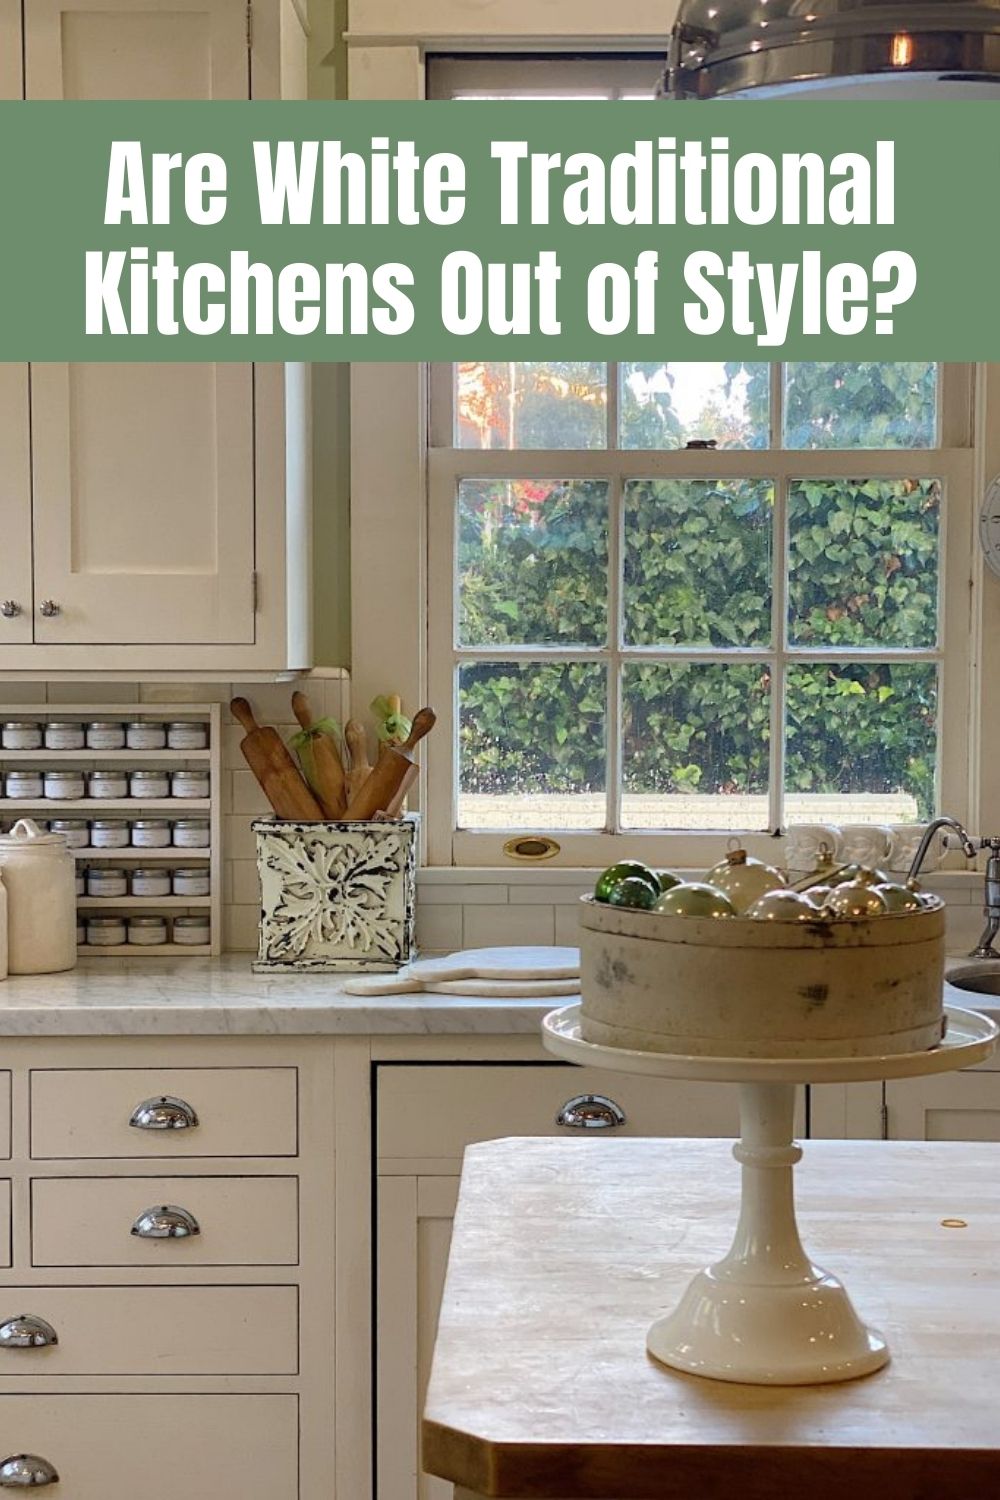 Recently, I read that Farmhouse White Kitchen Cabinets have gone out of style. In fact, white traditional kitchens are out.